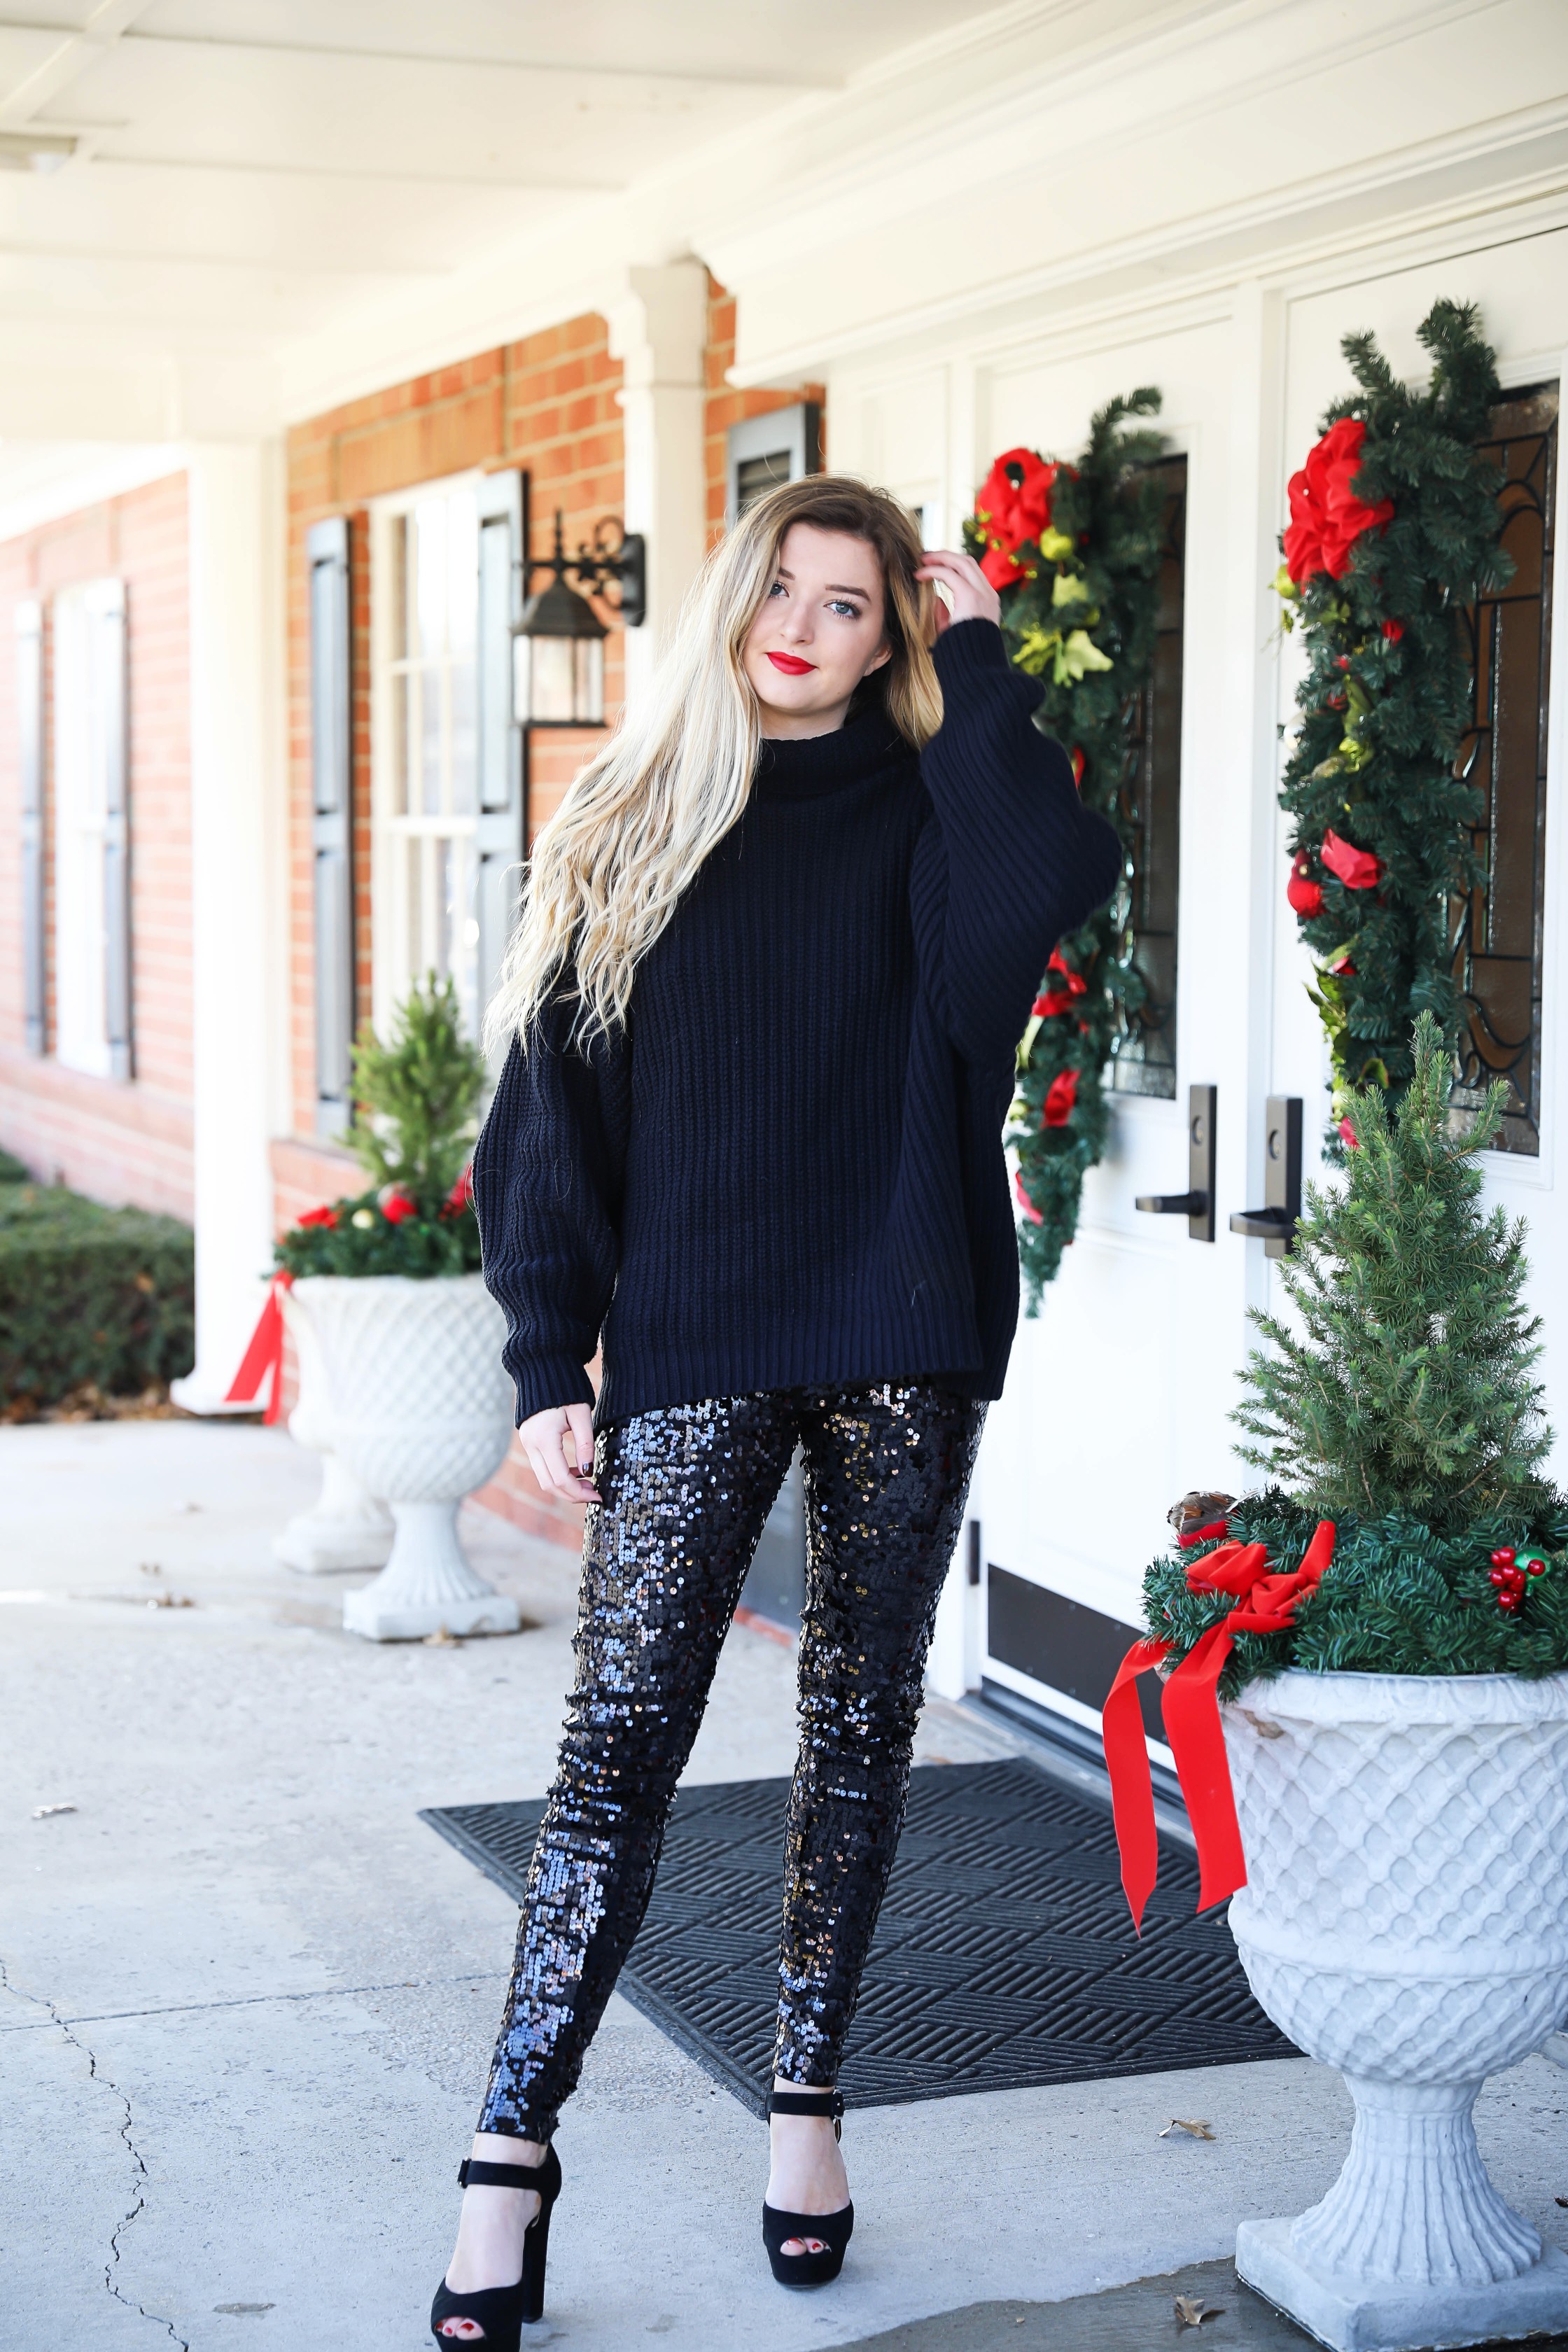 https://dailydoseofcharm.com/wp-content/uploads/2017/12/New-Years-eve-outfit-idea-sequin-pants-how-to-style-sequin-pants-for-nye-fashio-blog-daily-dose-of-charm-lauren-lindmark-4P6A7125.jpg